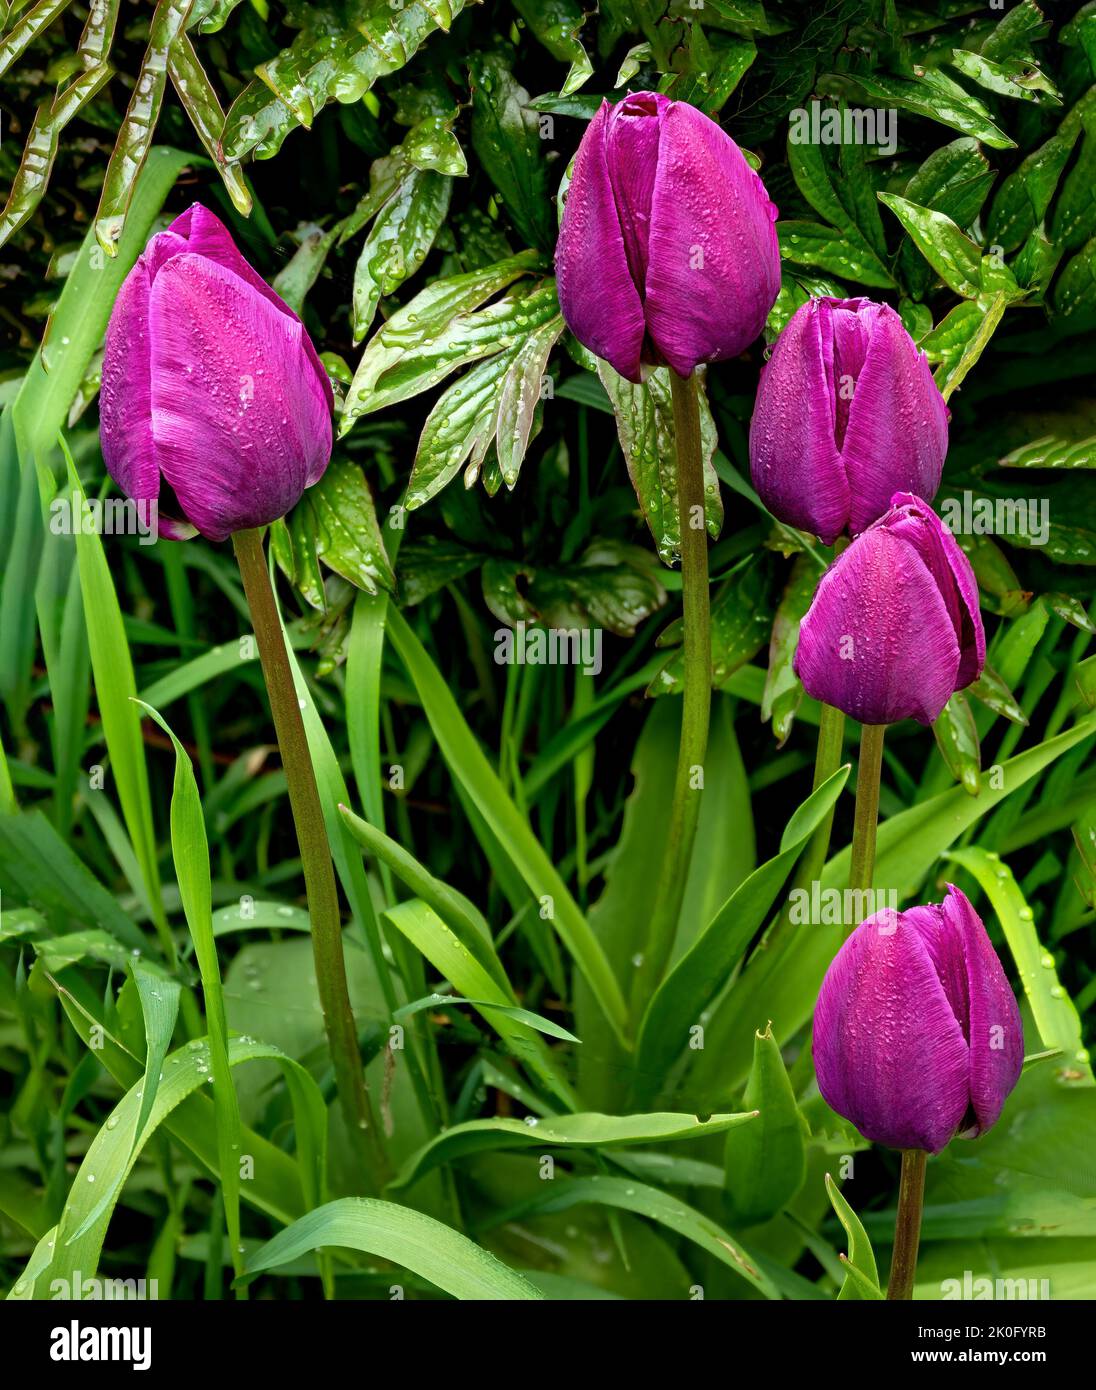 Flower garden with tulips and grass Stock Photo